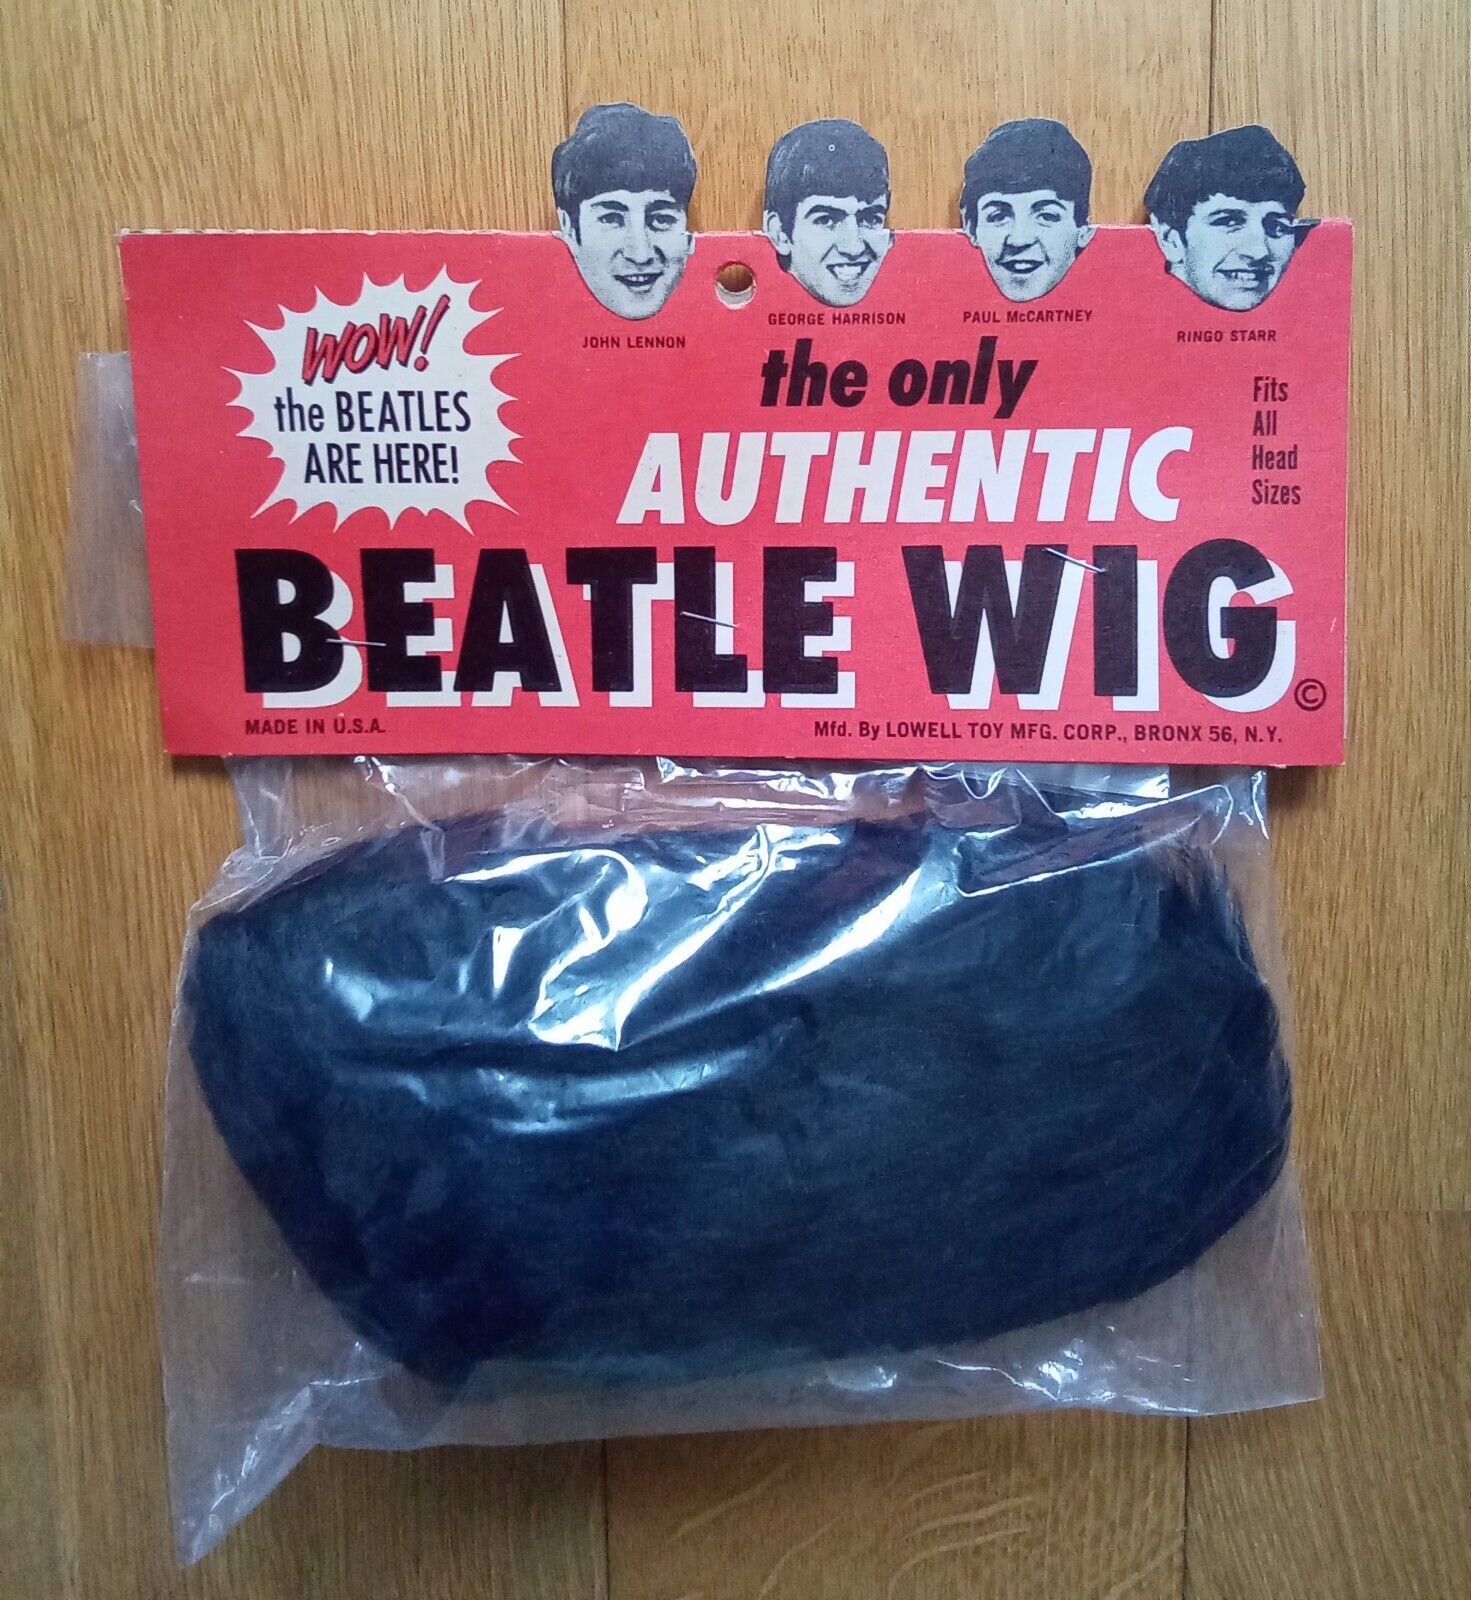 ORIGINAL 1964 BEATLES WIG BY LOWELL, NEW YORK IN STUNNING CONDITION